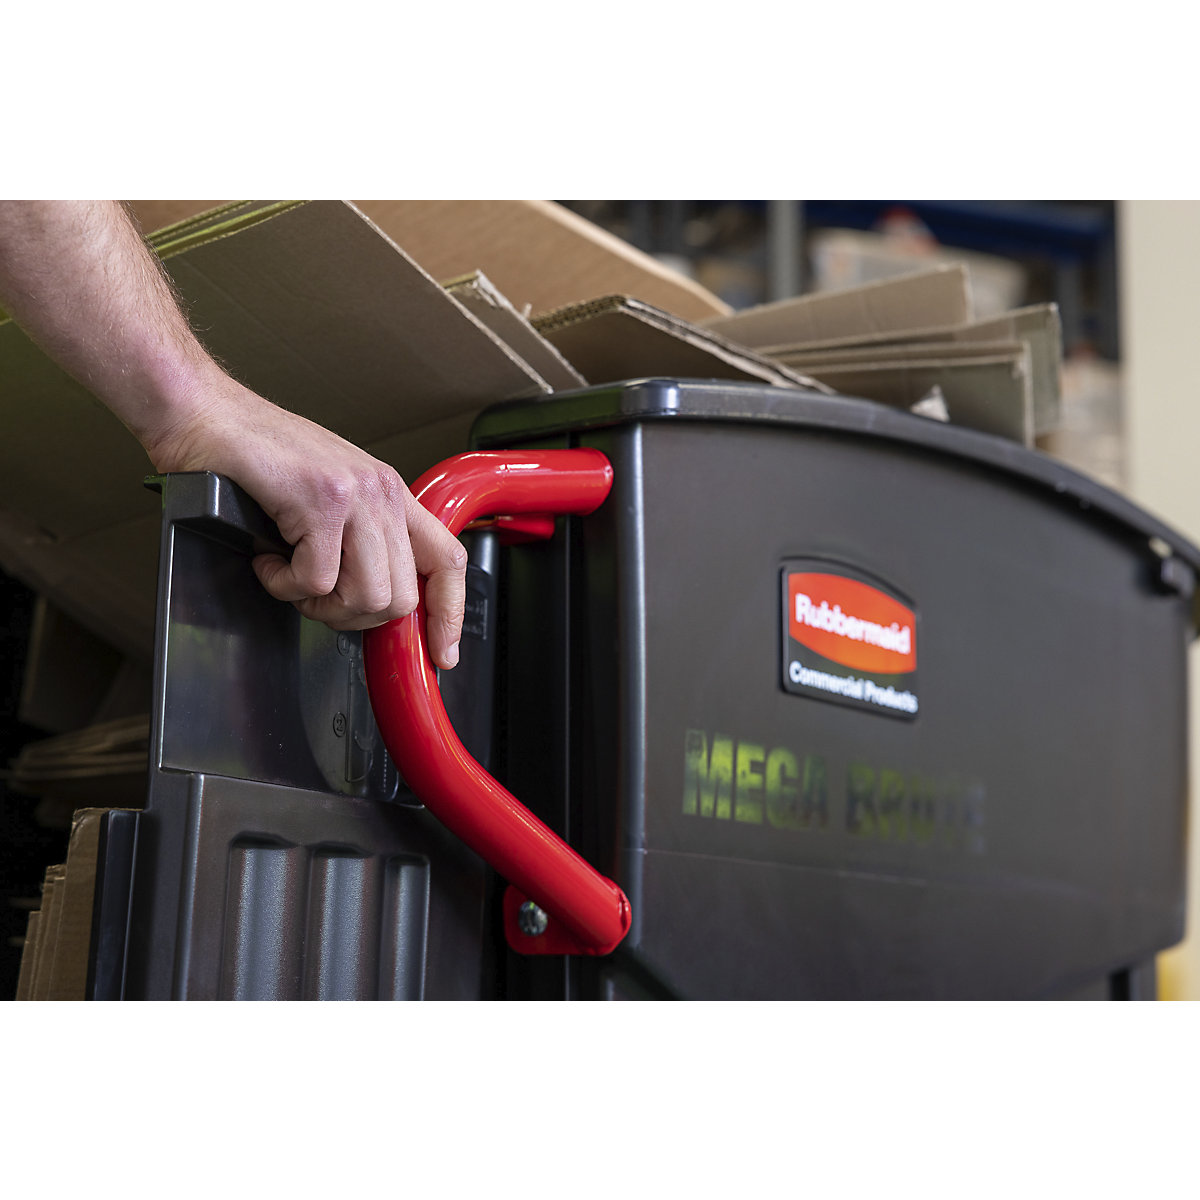 Mega BRUTE® mobile waste collector – Rubbermaid (Product illustration 5)-4